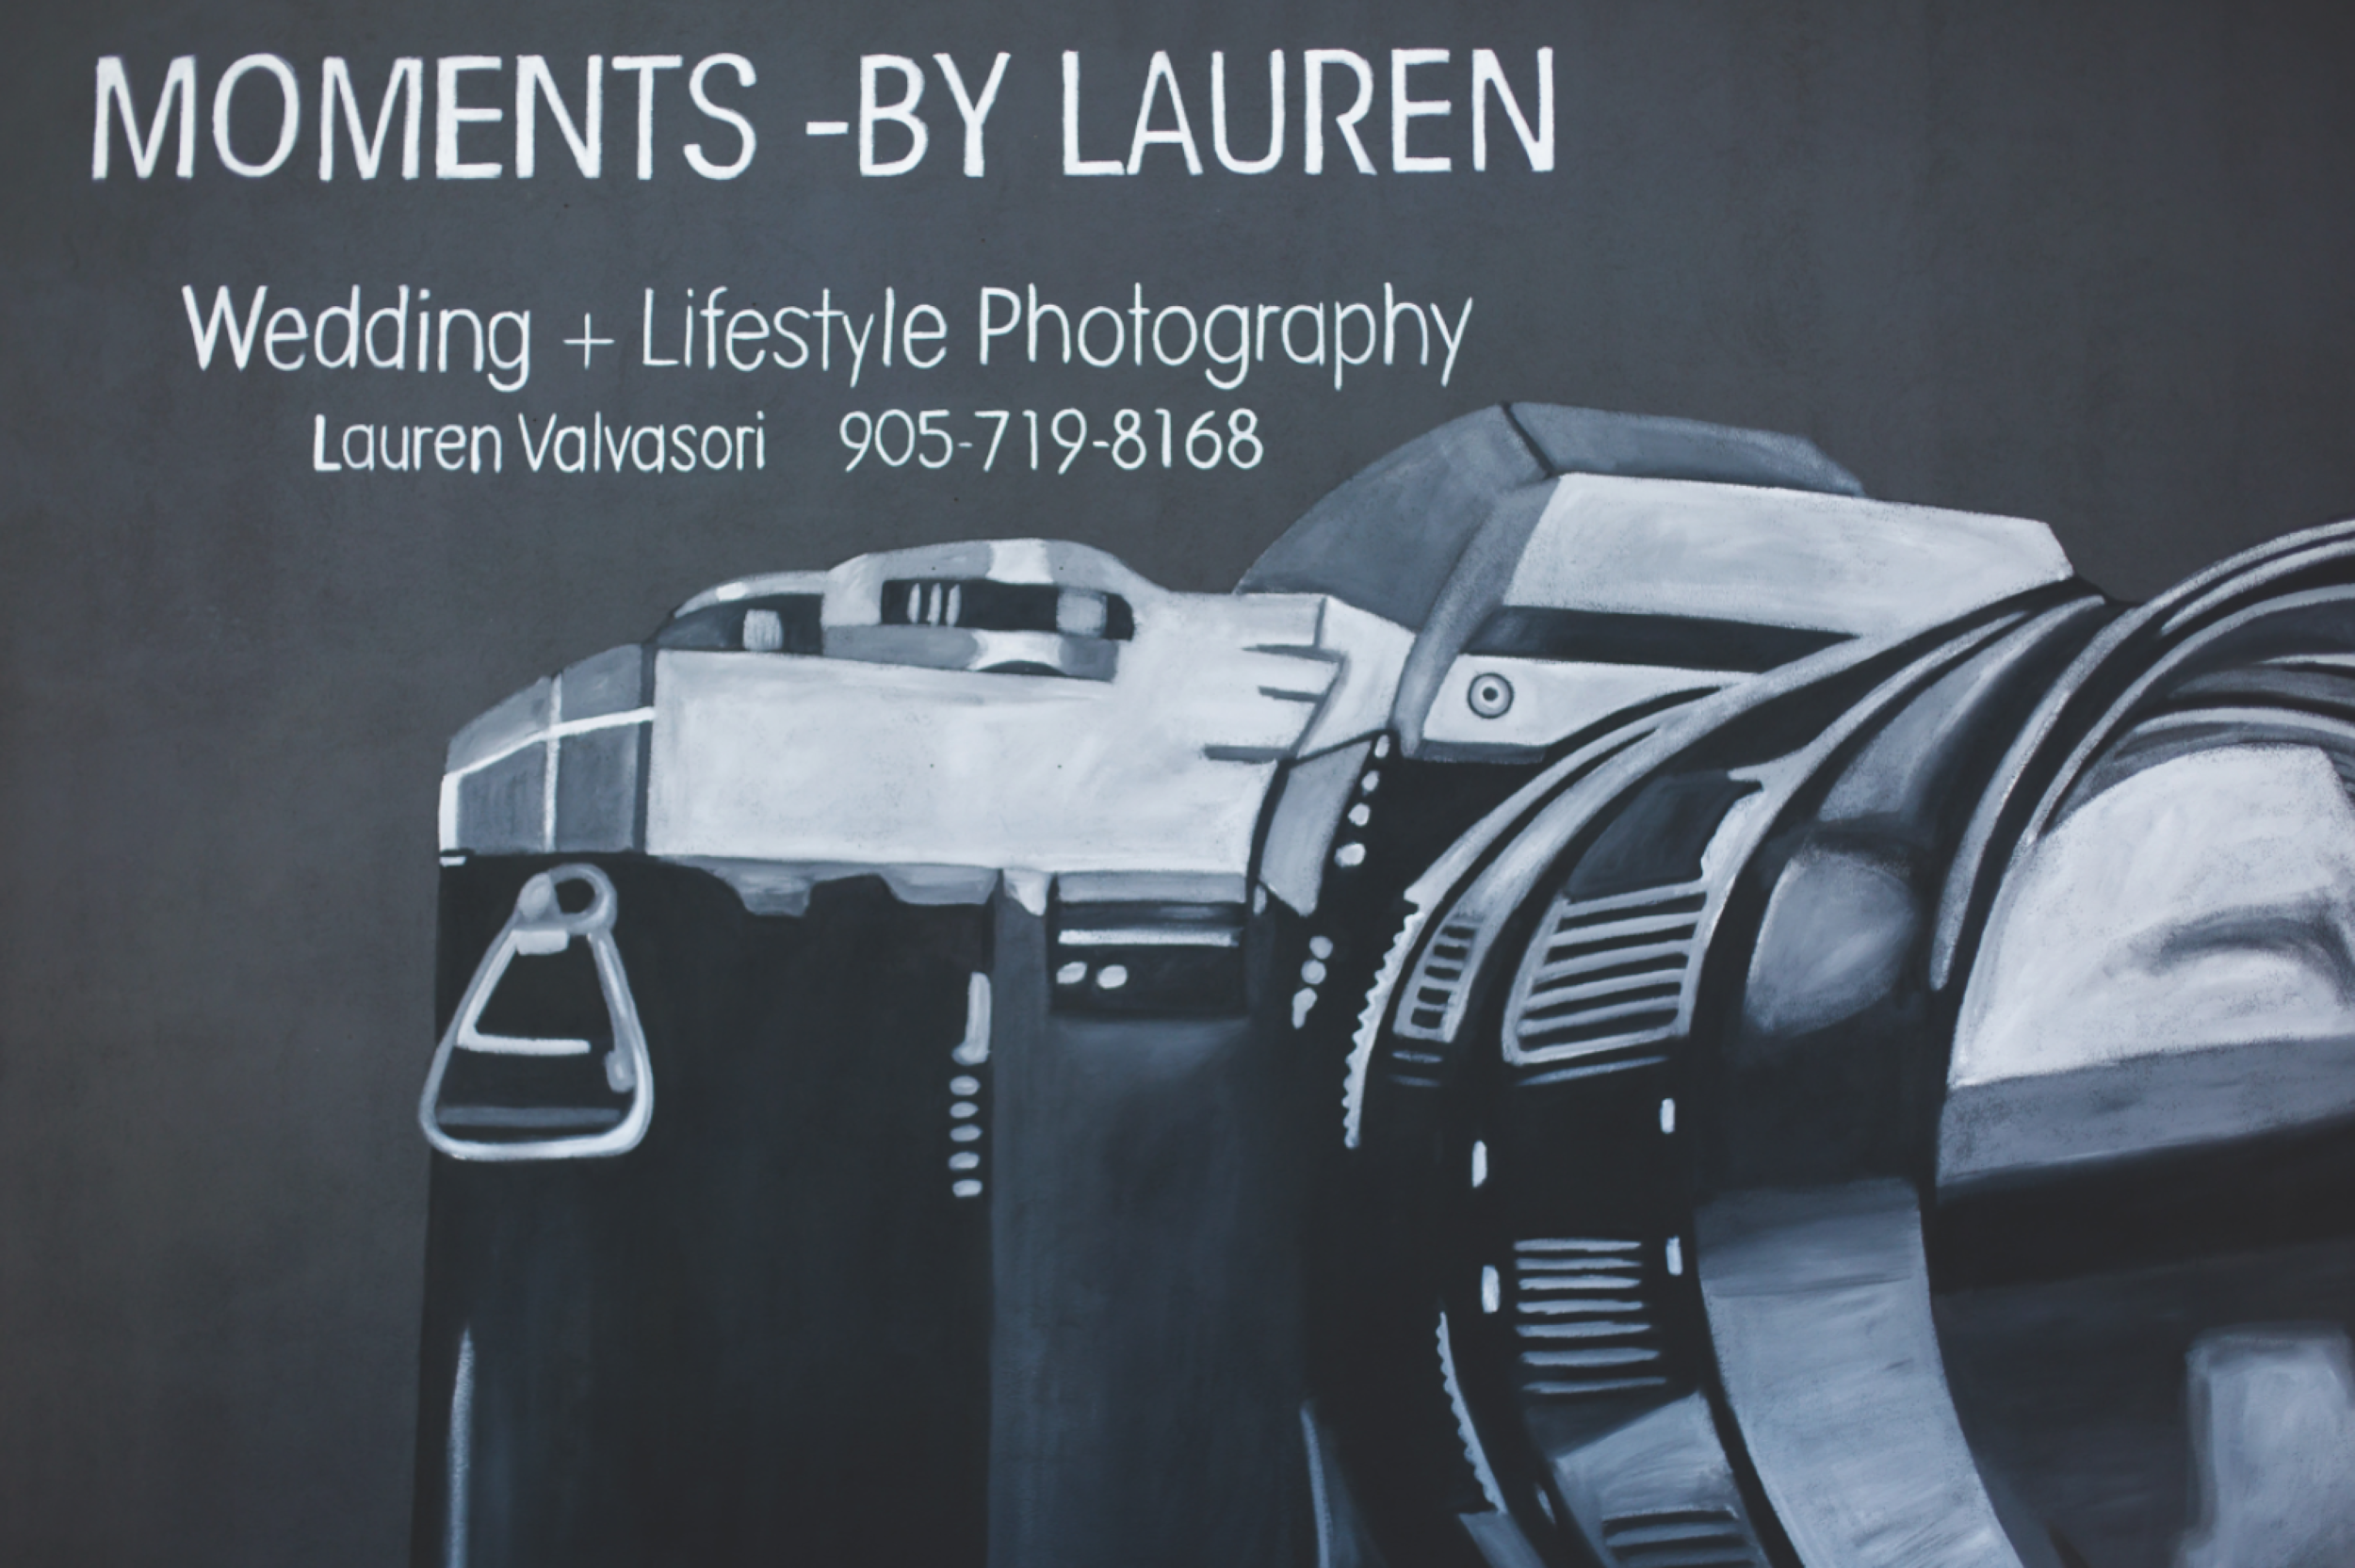 Moments-by-Lauren-Camera-Mural-Claire-Hall-Design-Photo-8.png